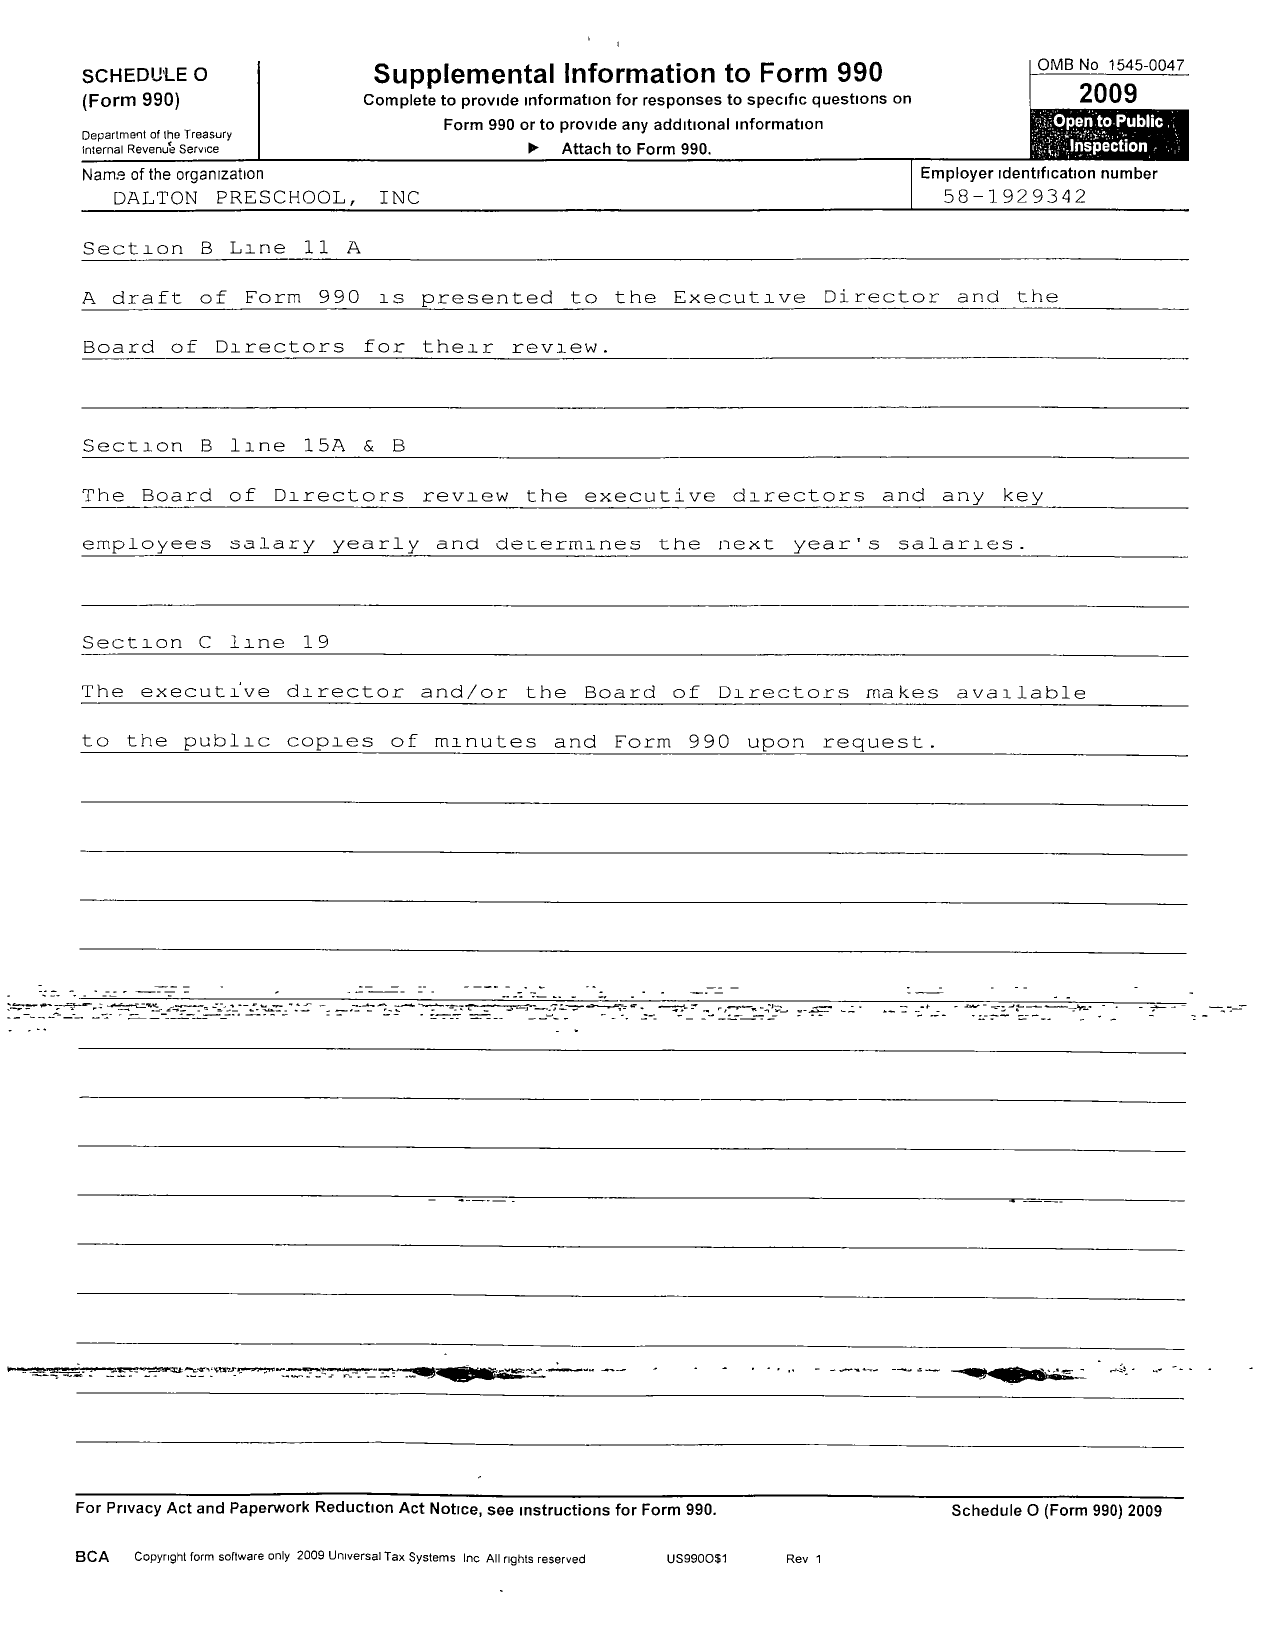 Image of first page of 2009 Form 990R for Dalton Preschool